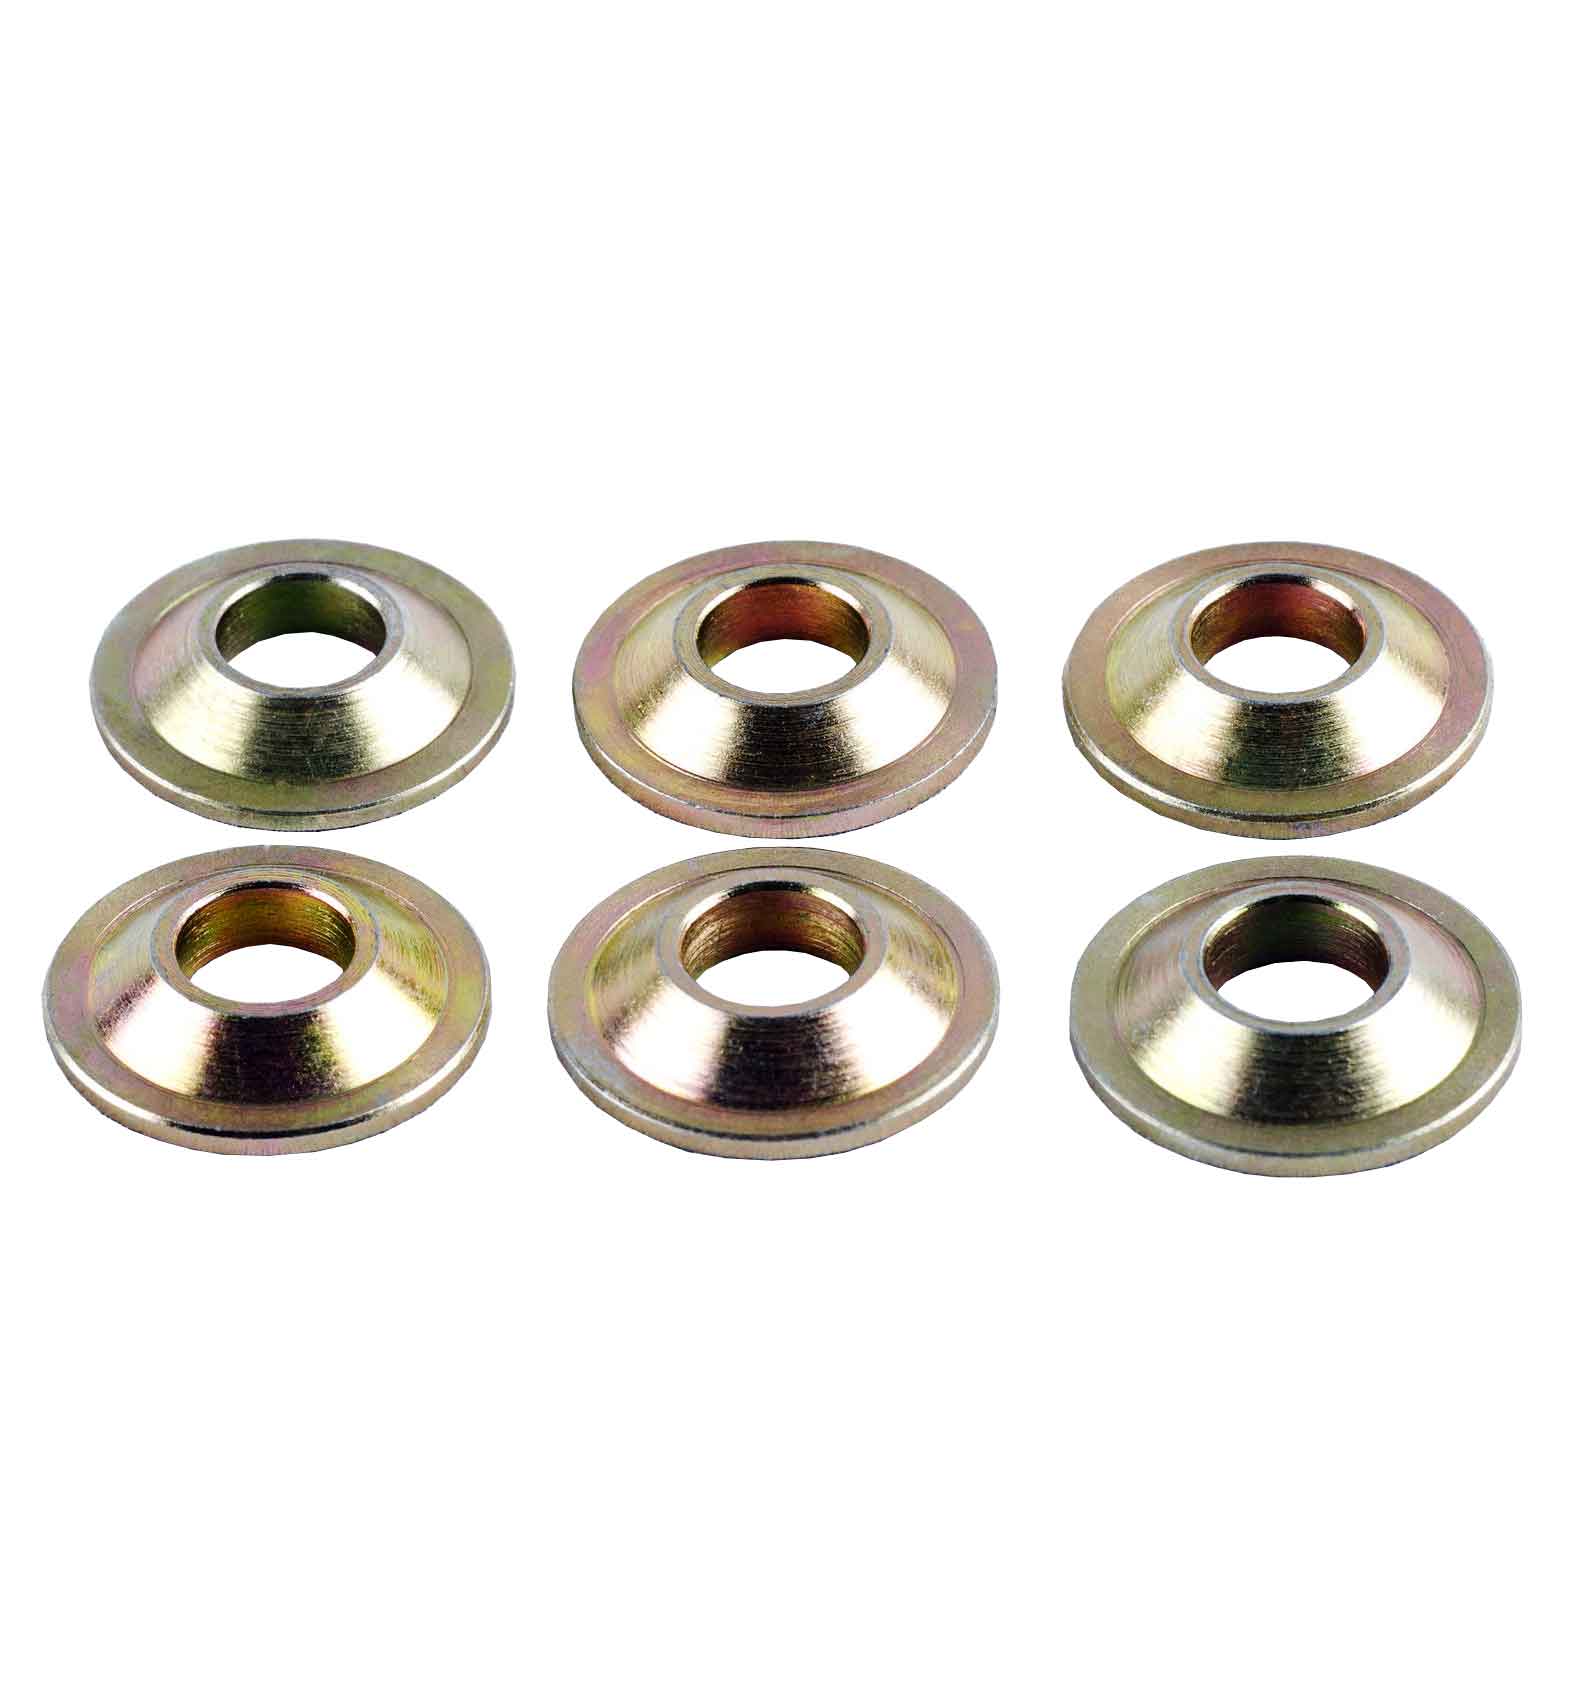 M10 Rod End Misalignment Spacers 10mm (Pack of 6)